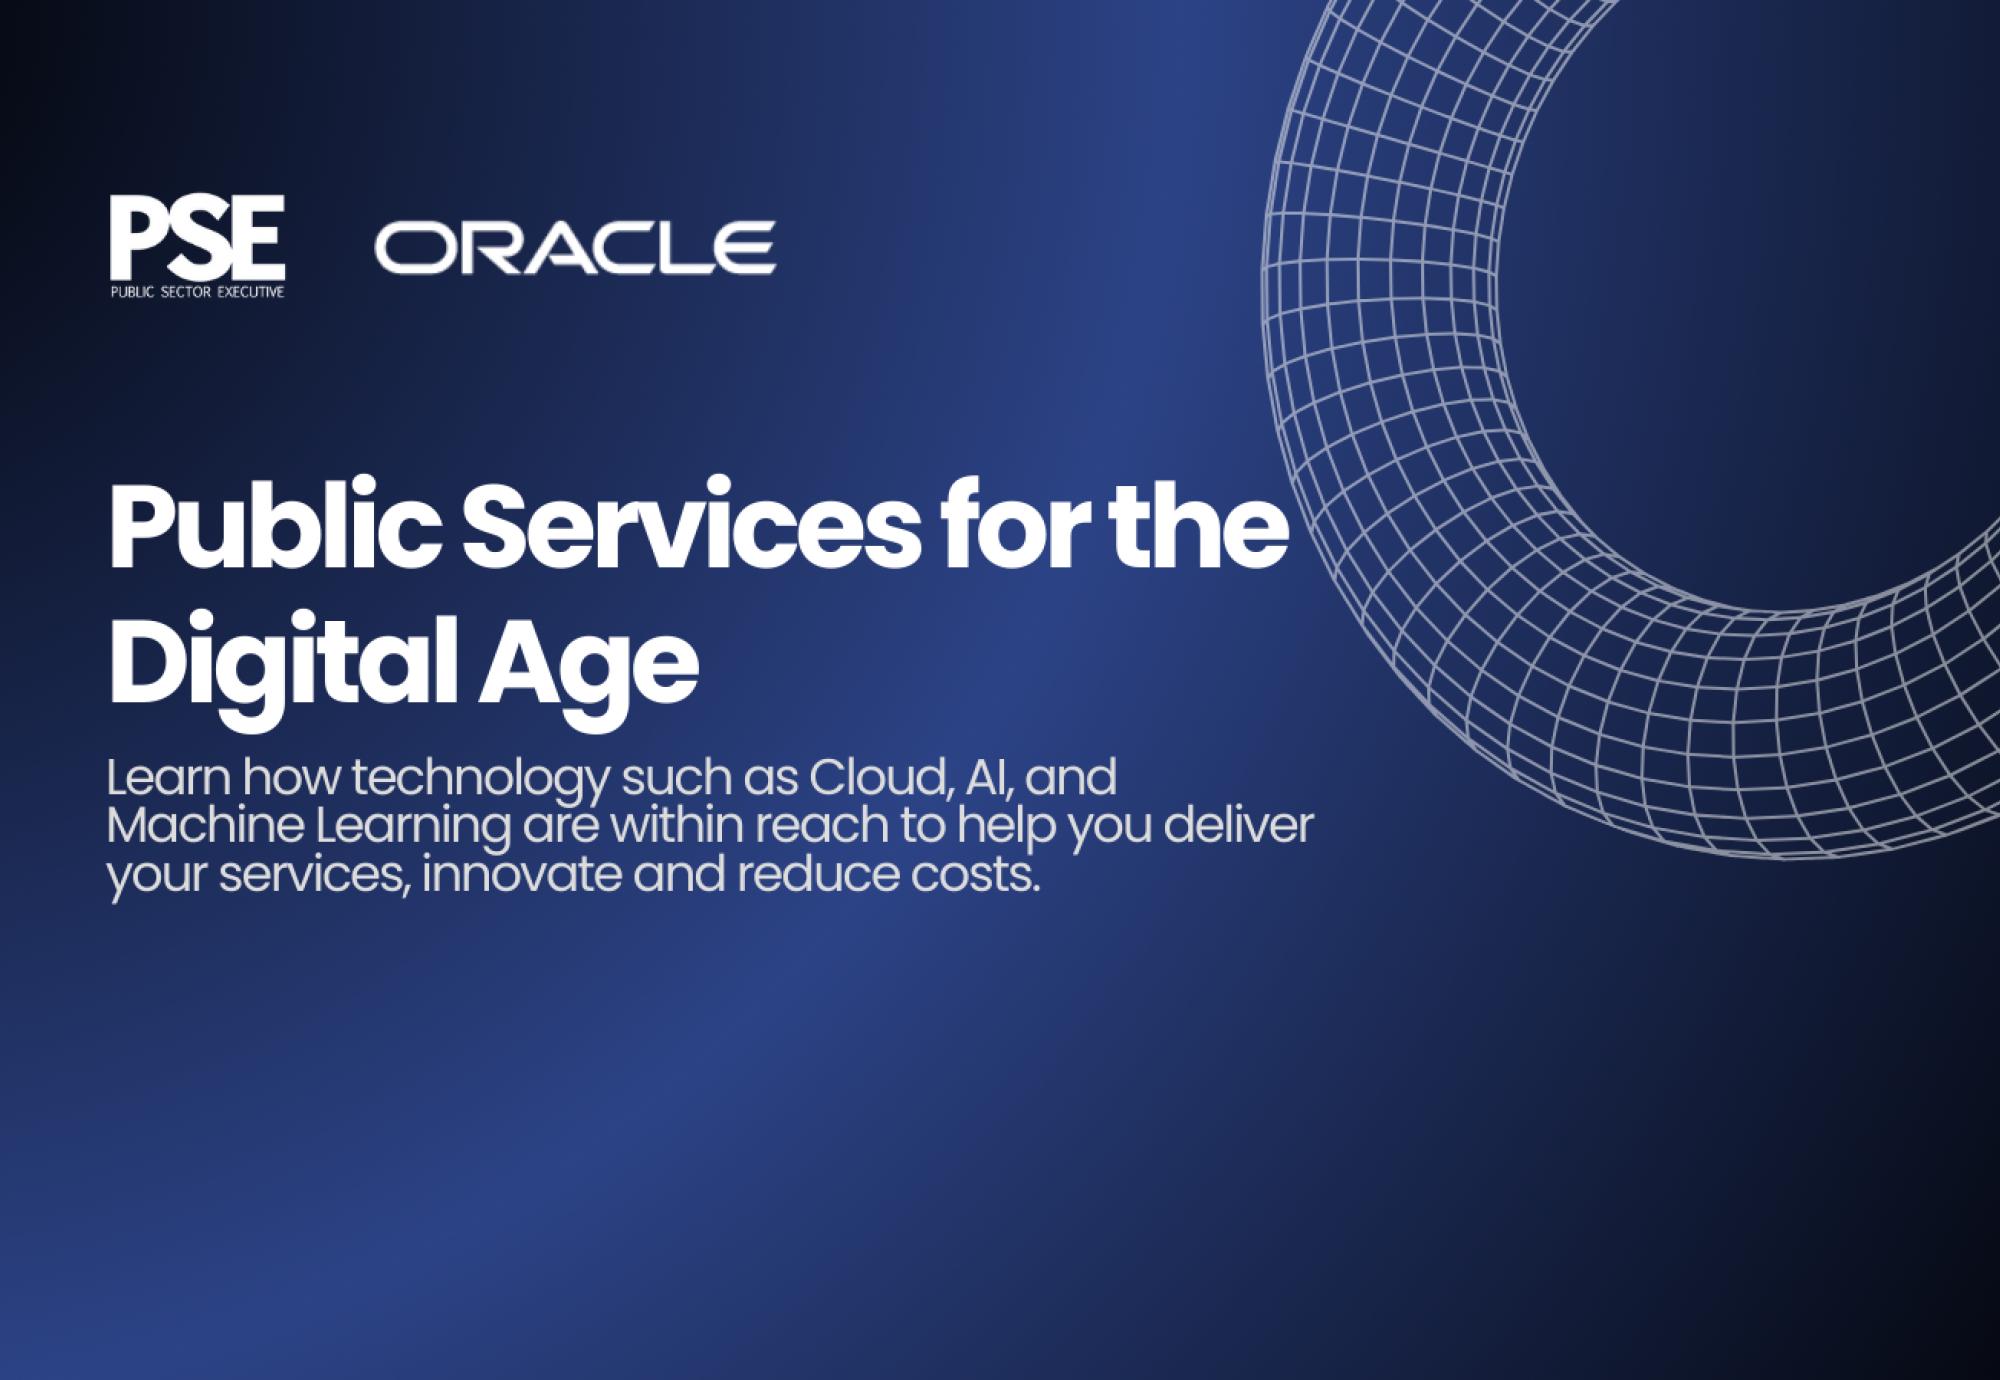 Image promoting Public Sector Executive's Digital Services for the Digital Age Webinar in partnership with Oracle